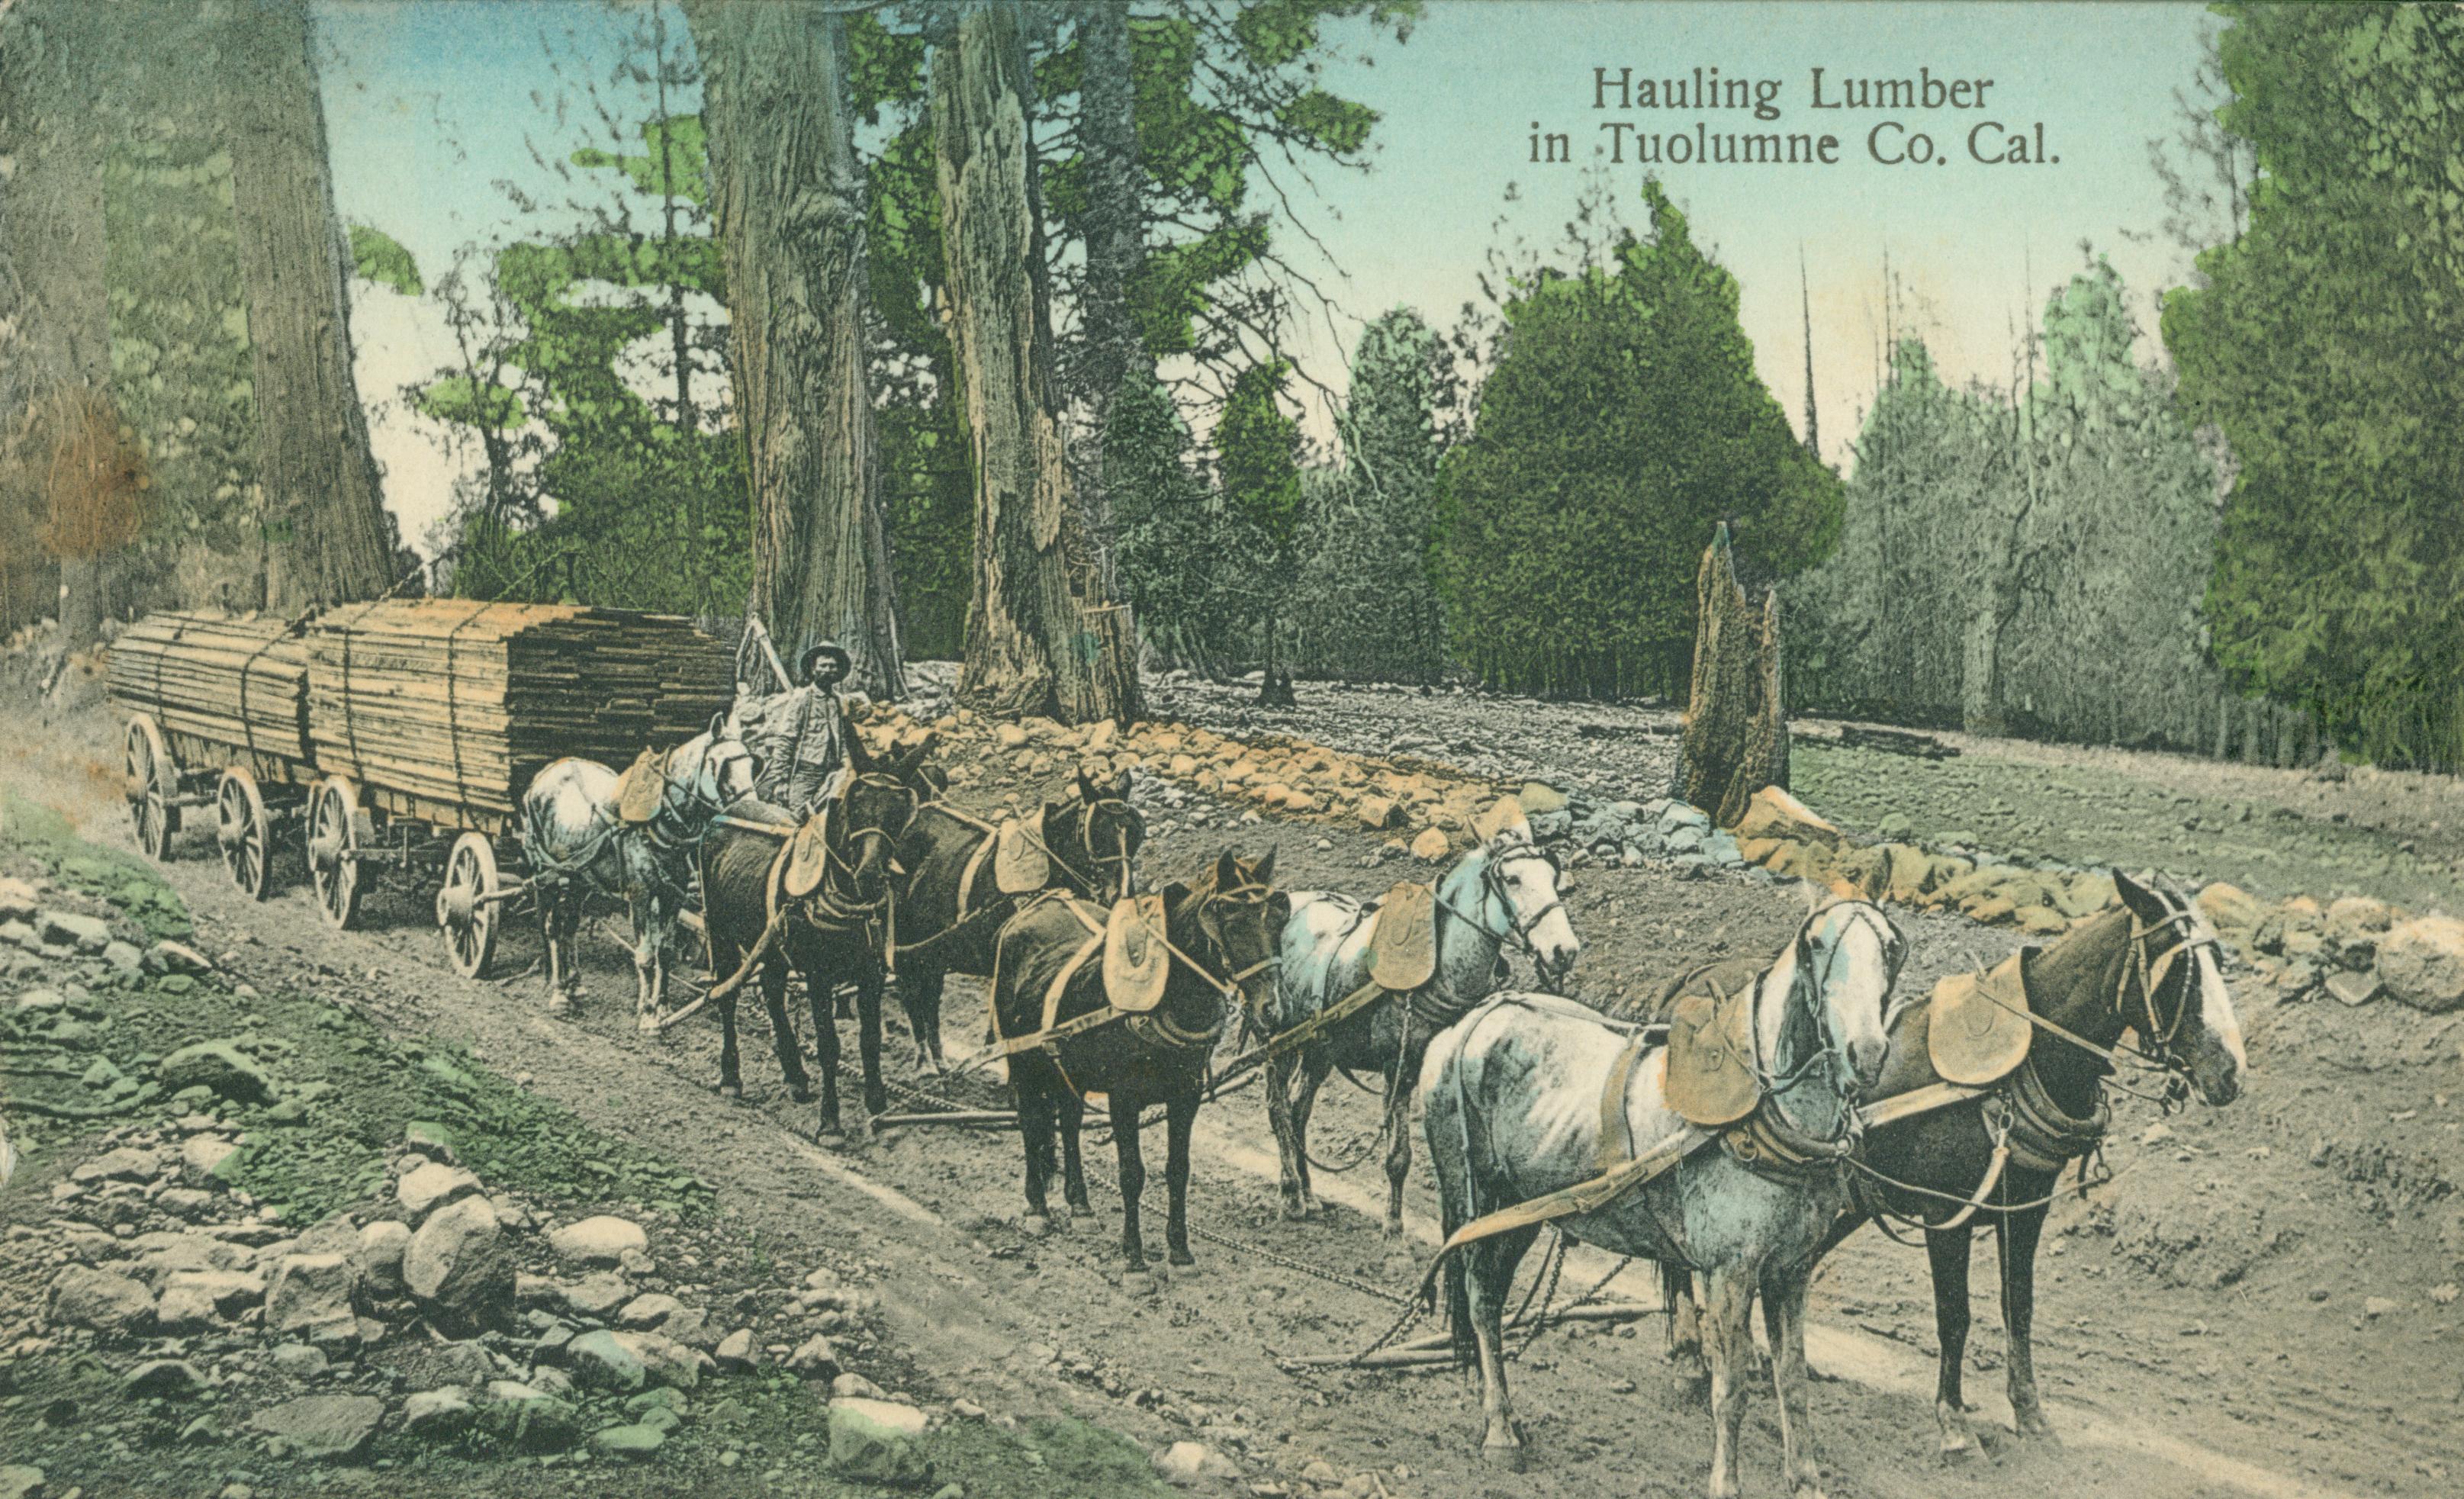 Shows four teams of horses pulling two wagons loaded with timber